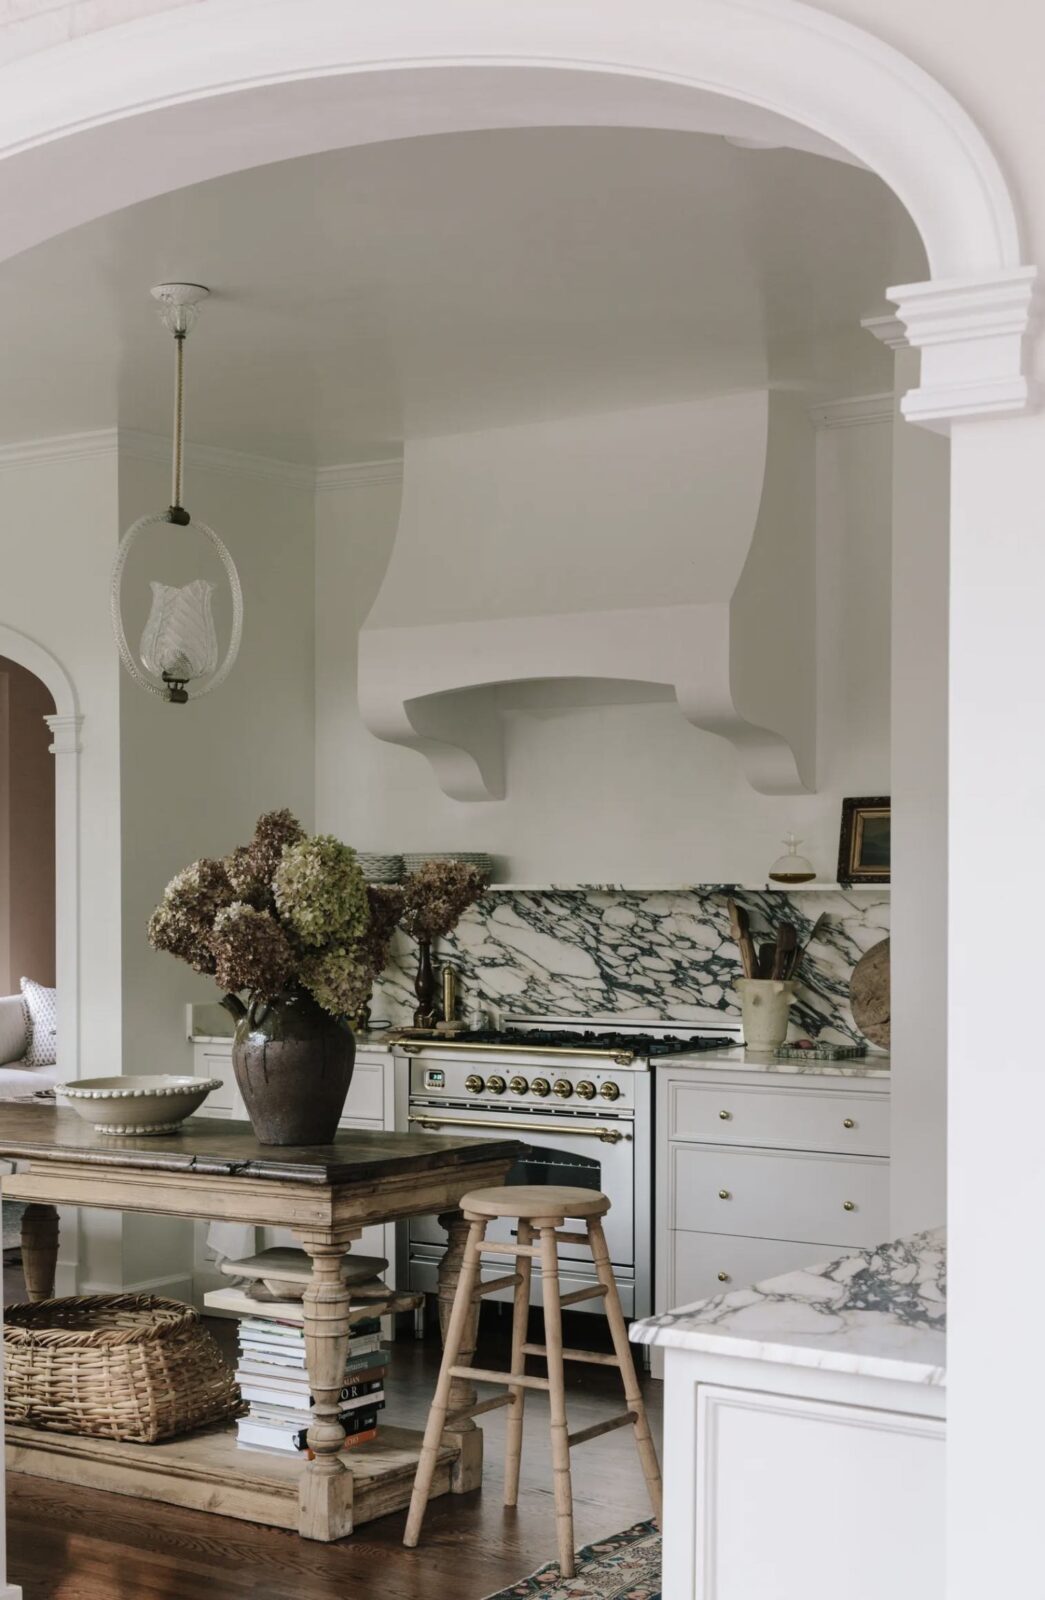 White kitchen with marble countertops, backsplash, and shelf, wood flooring, and antique wood island styled with wicker baskets, stacked cookbooks, and a large vase with dried hydrangeas